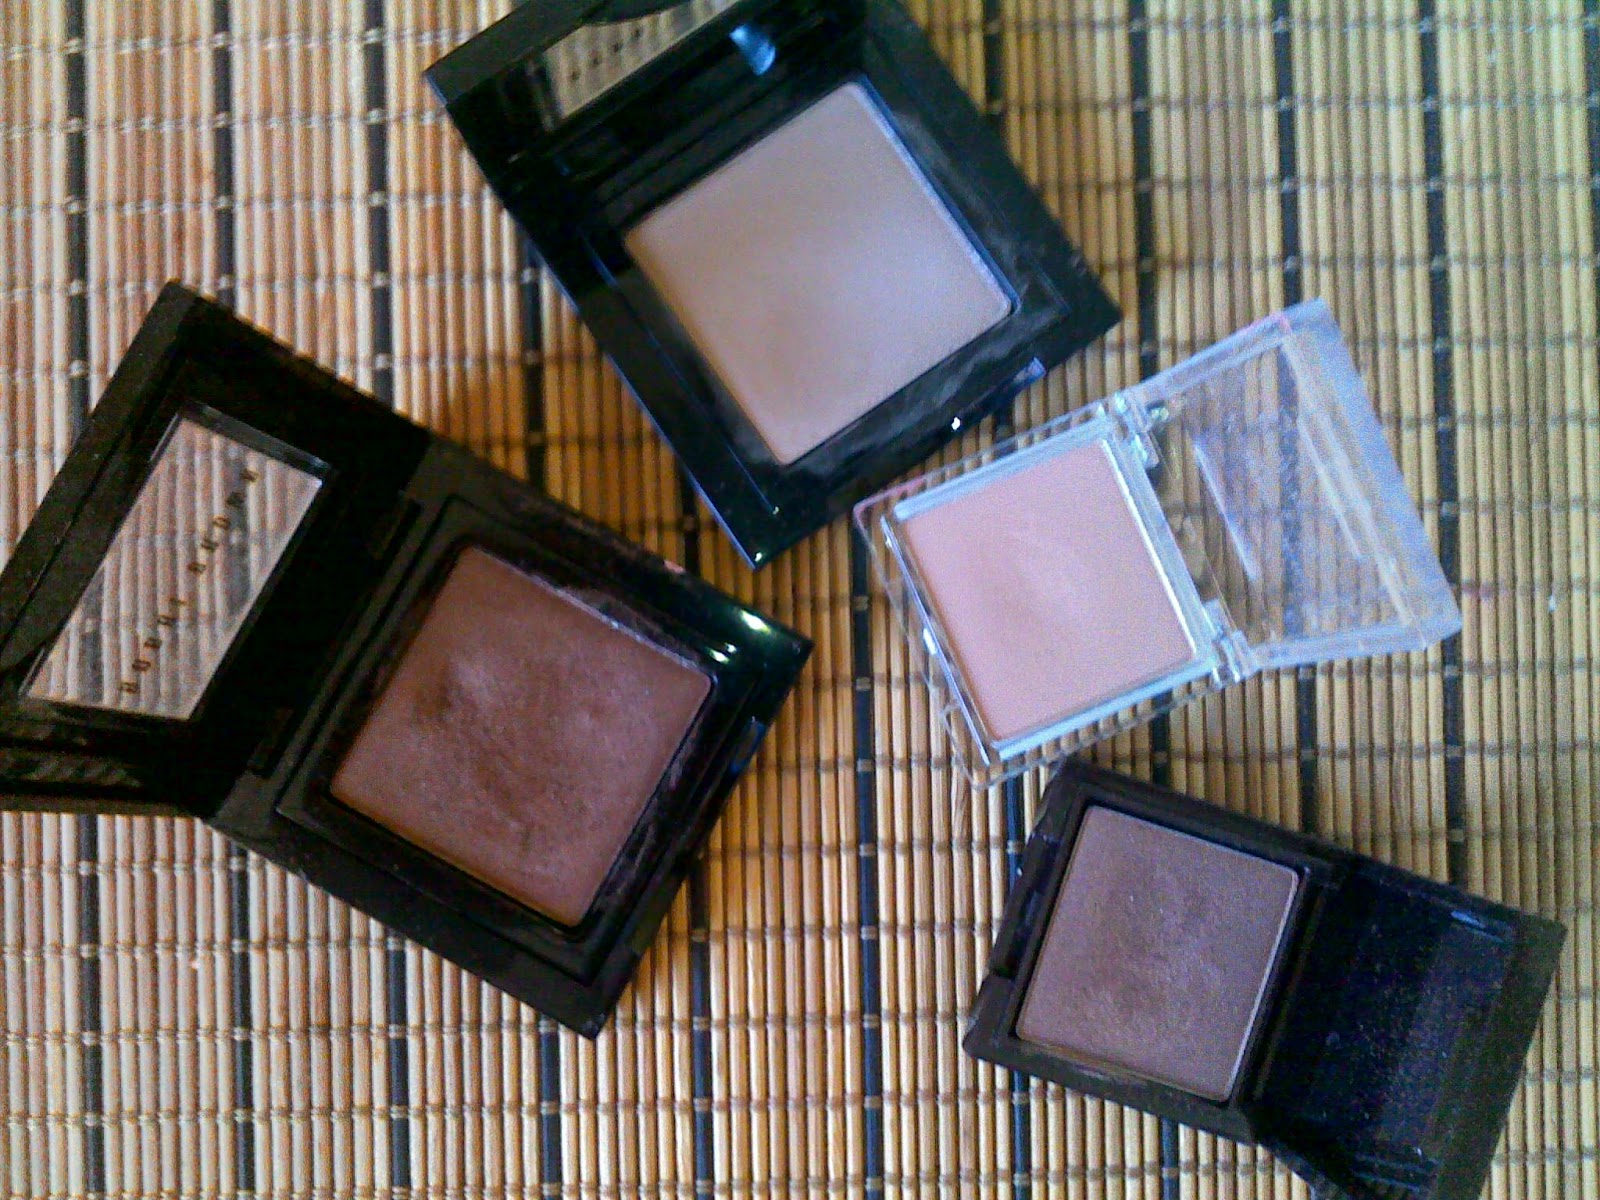 Nude single eyeshadows from Bobbi Brown, Erre Due and Korres